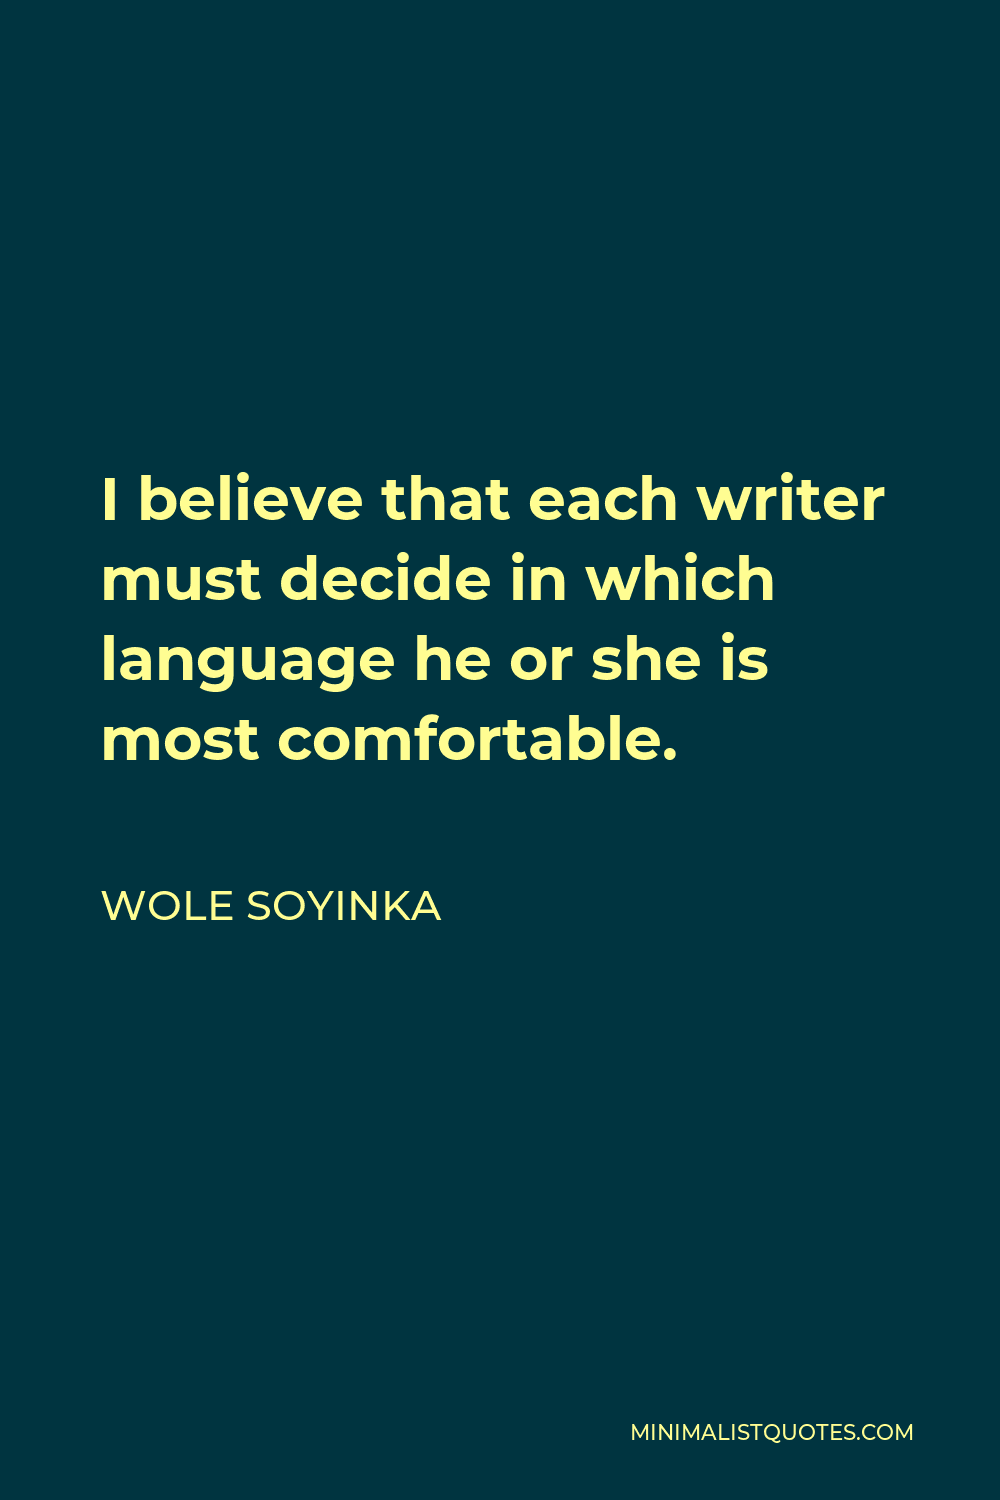 Wole Soyinka Quote - I believe that each writer must decide in which language he or she is most comfortable.